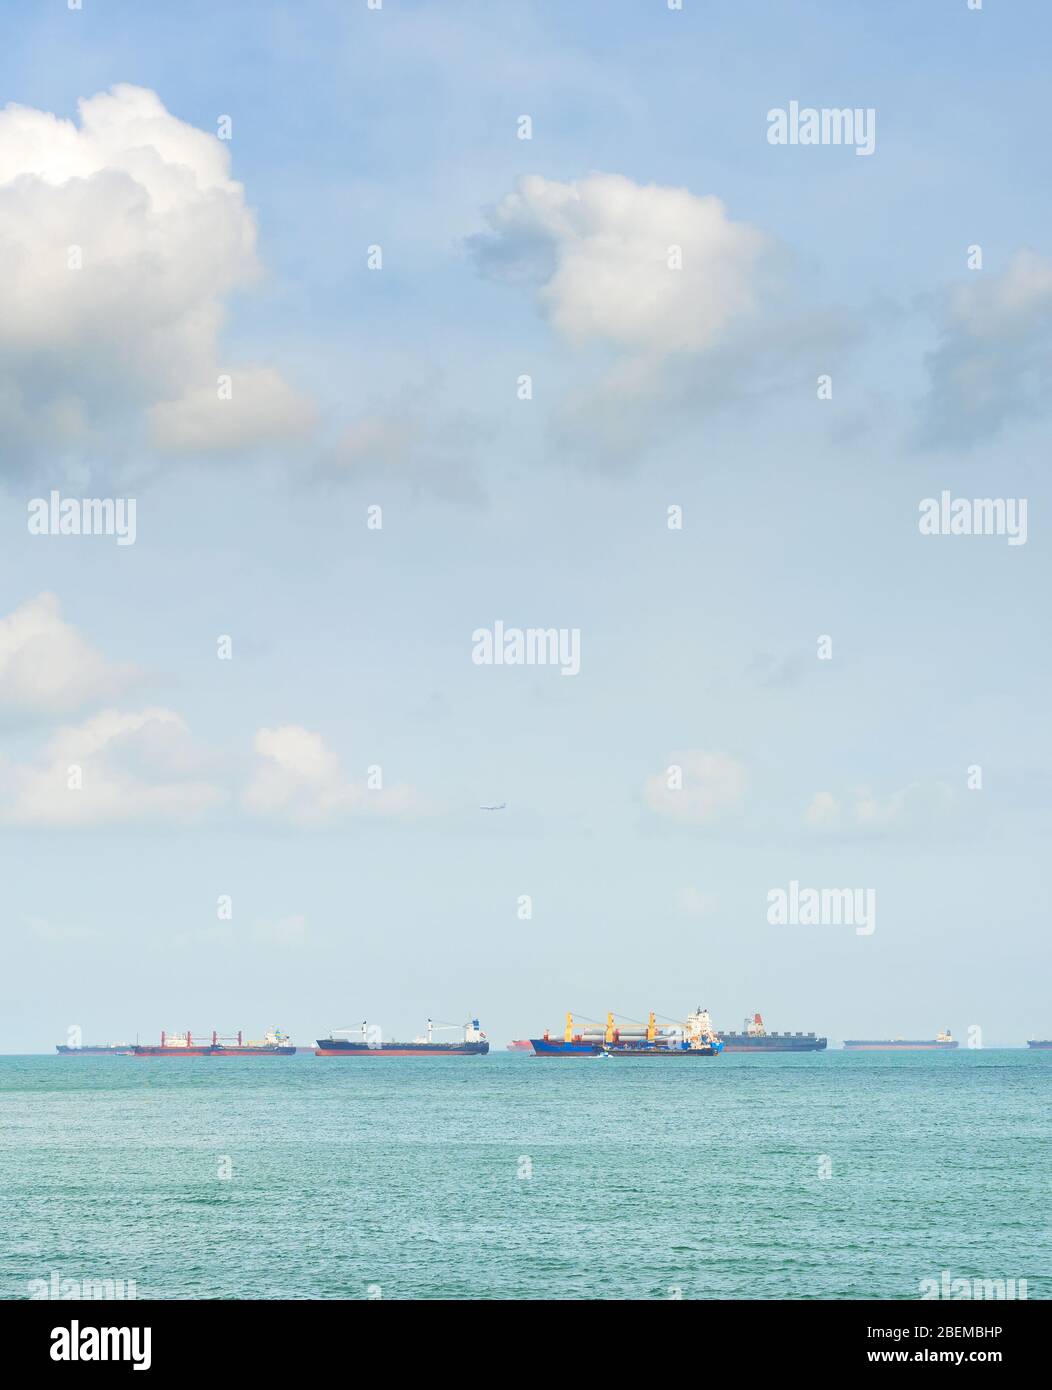 Industrial cargo shipping tankers in Singapore harbor Stock Photo